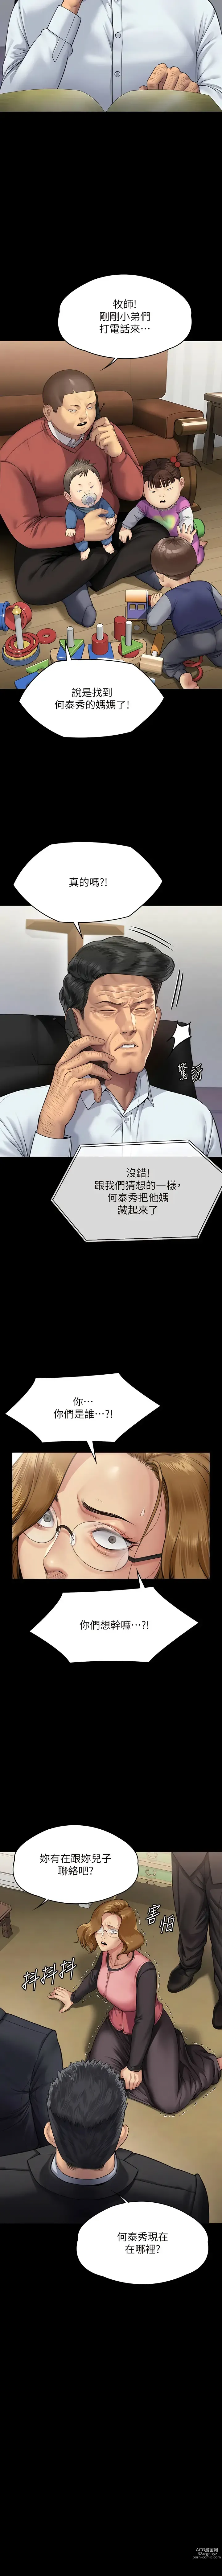 Page 164 of manga 傀儡 Queen Bee 301-308